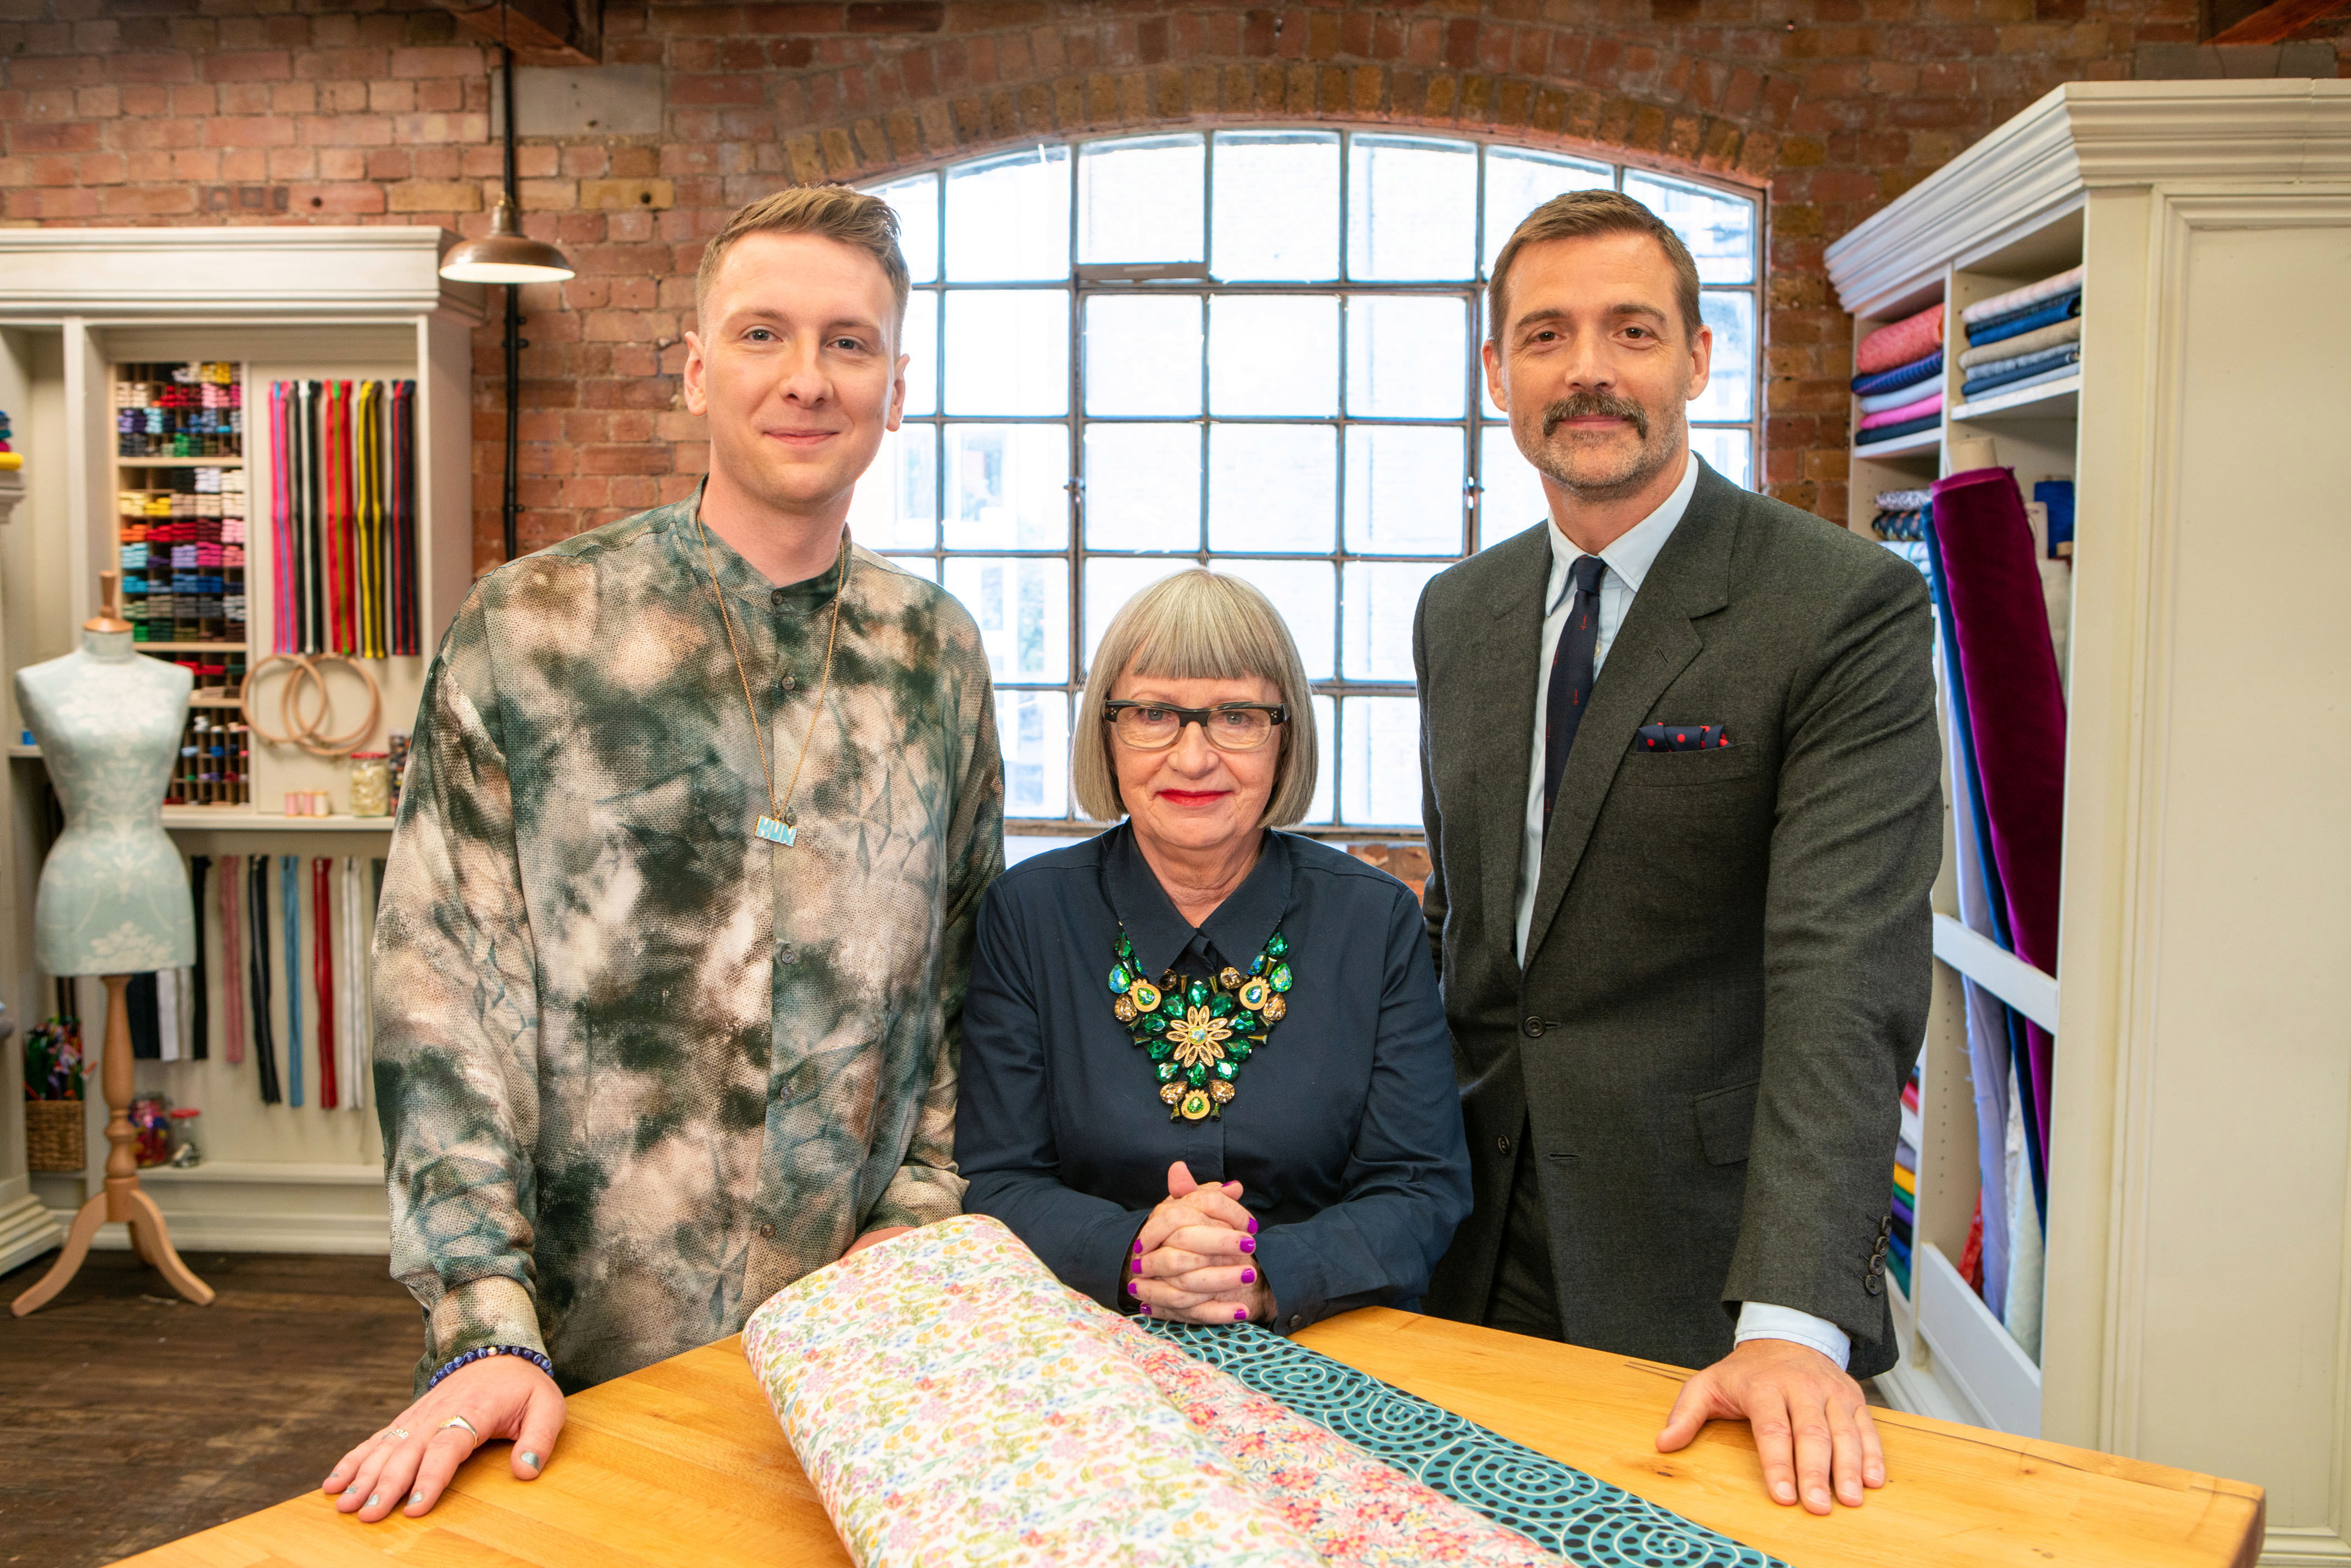 When does the Great British Sewing Bee 2021 start on BBC One?